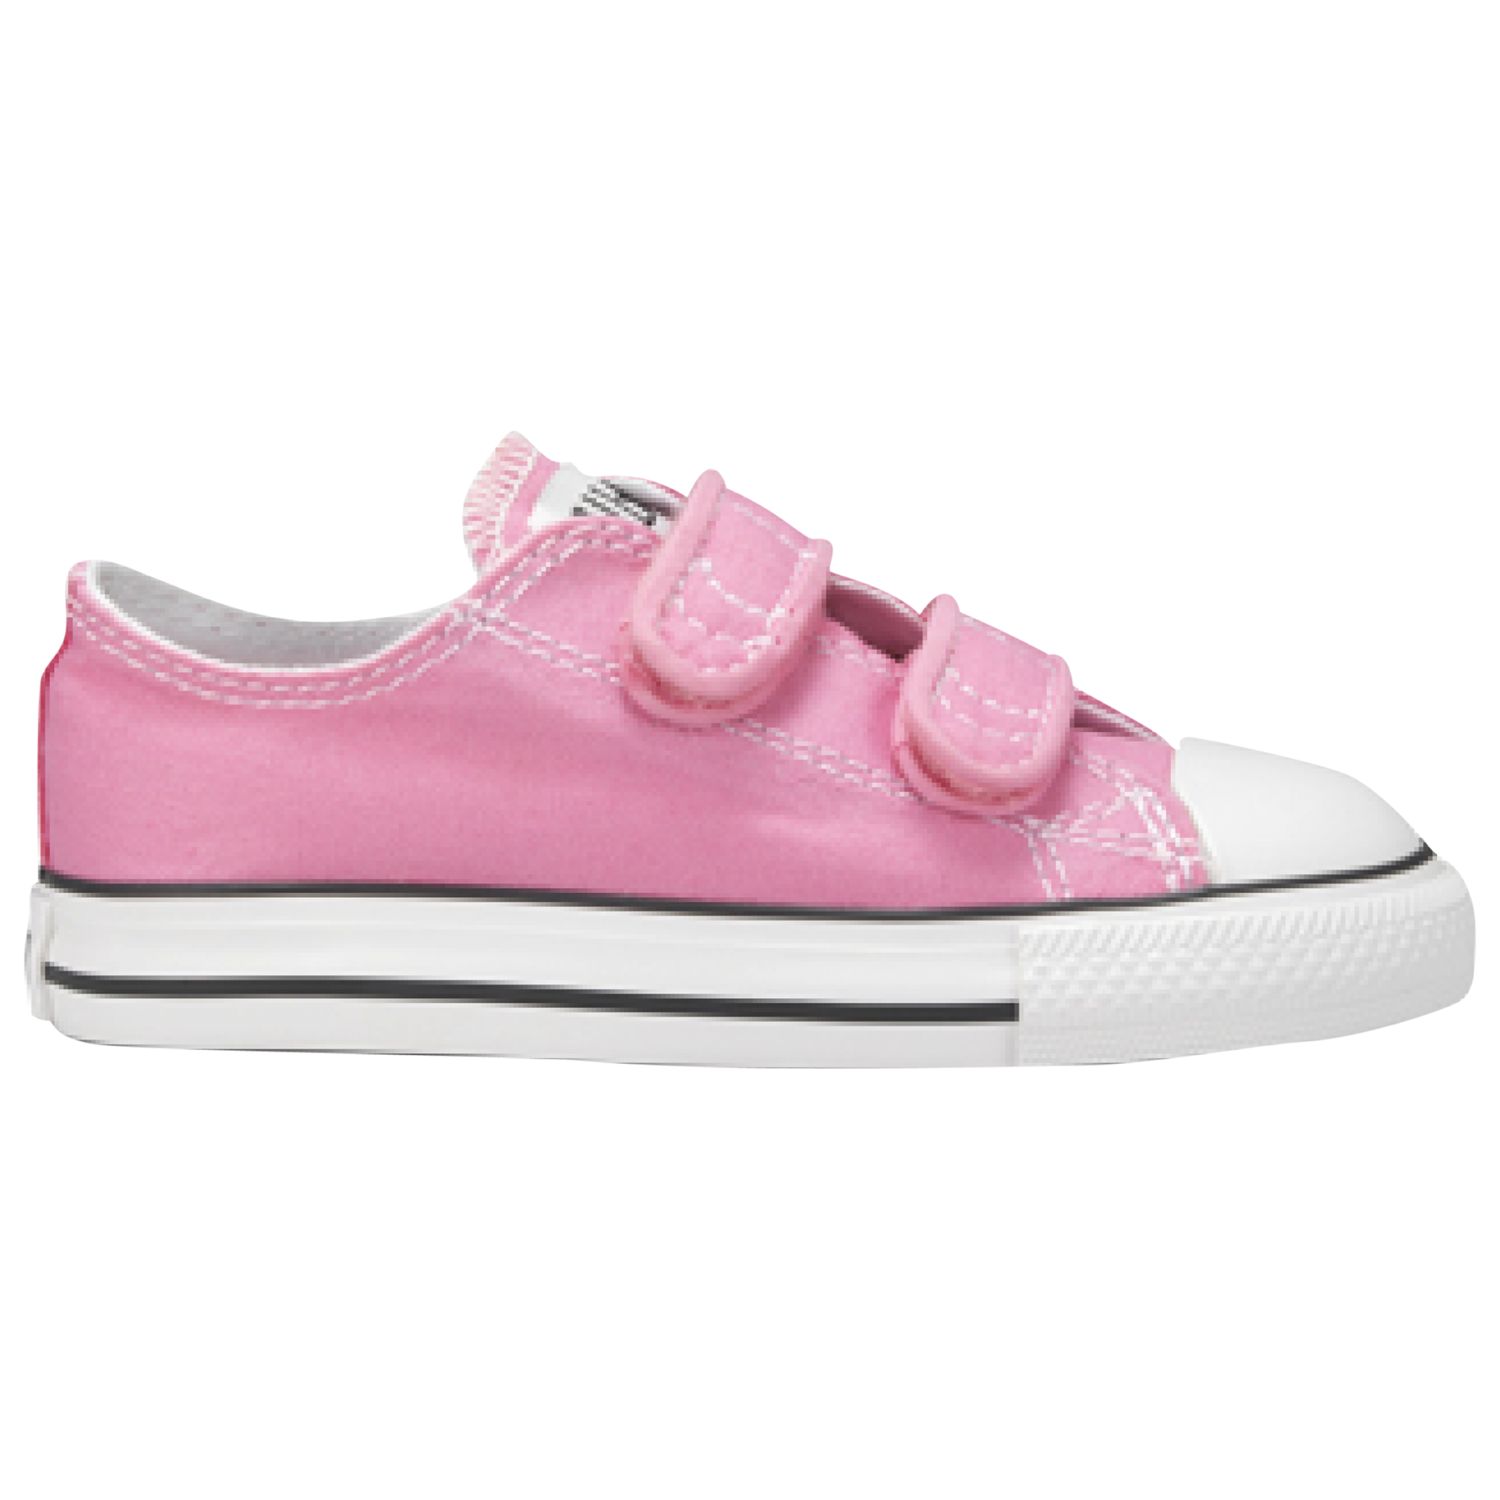 Converse Children's Chuck Taylor All Star Riptape Trainers, Pink, 3 Jnr